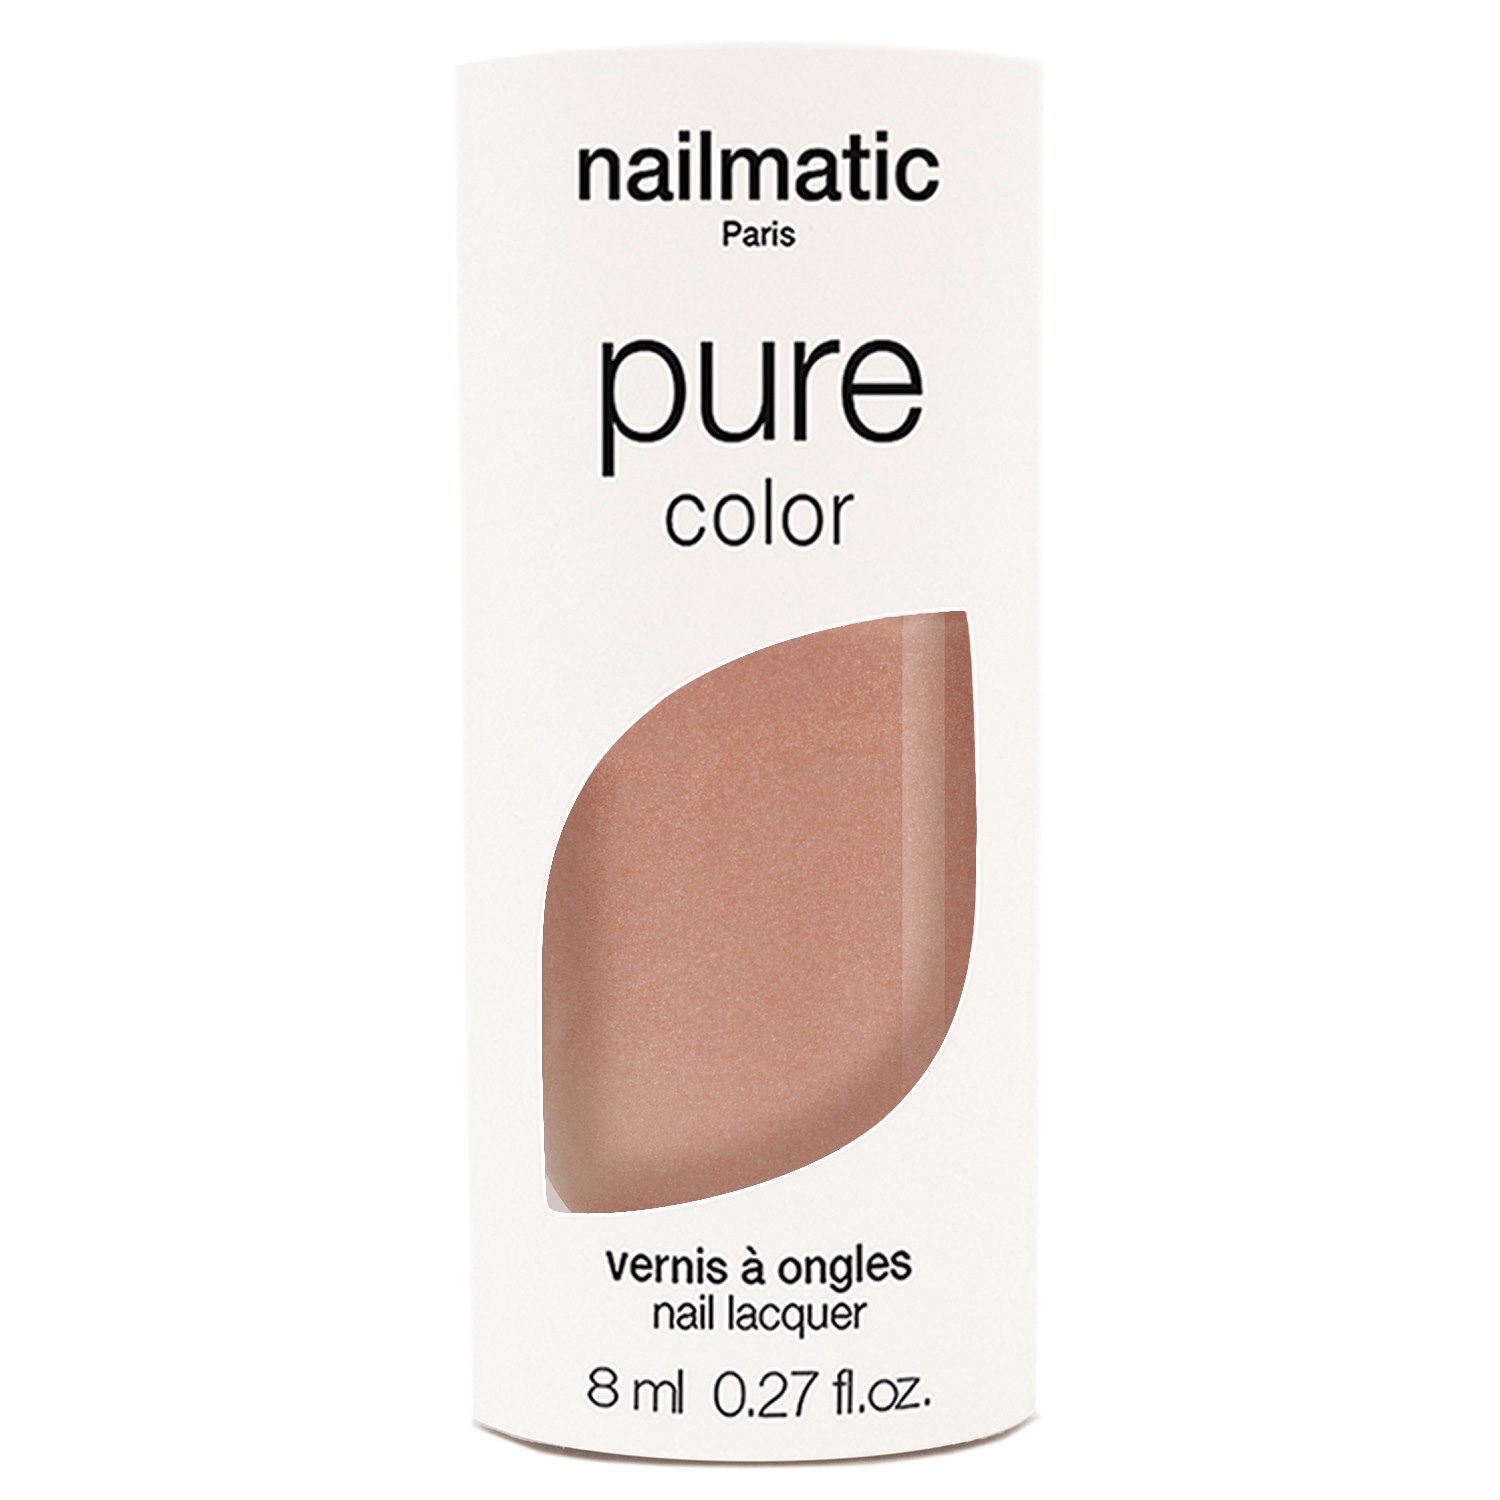 Nailmatic Pure Color Nail Polish 10-free, 8 ml Britany - Pearly Beige